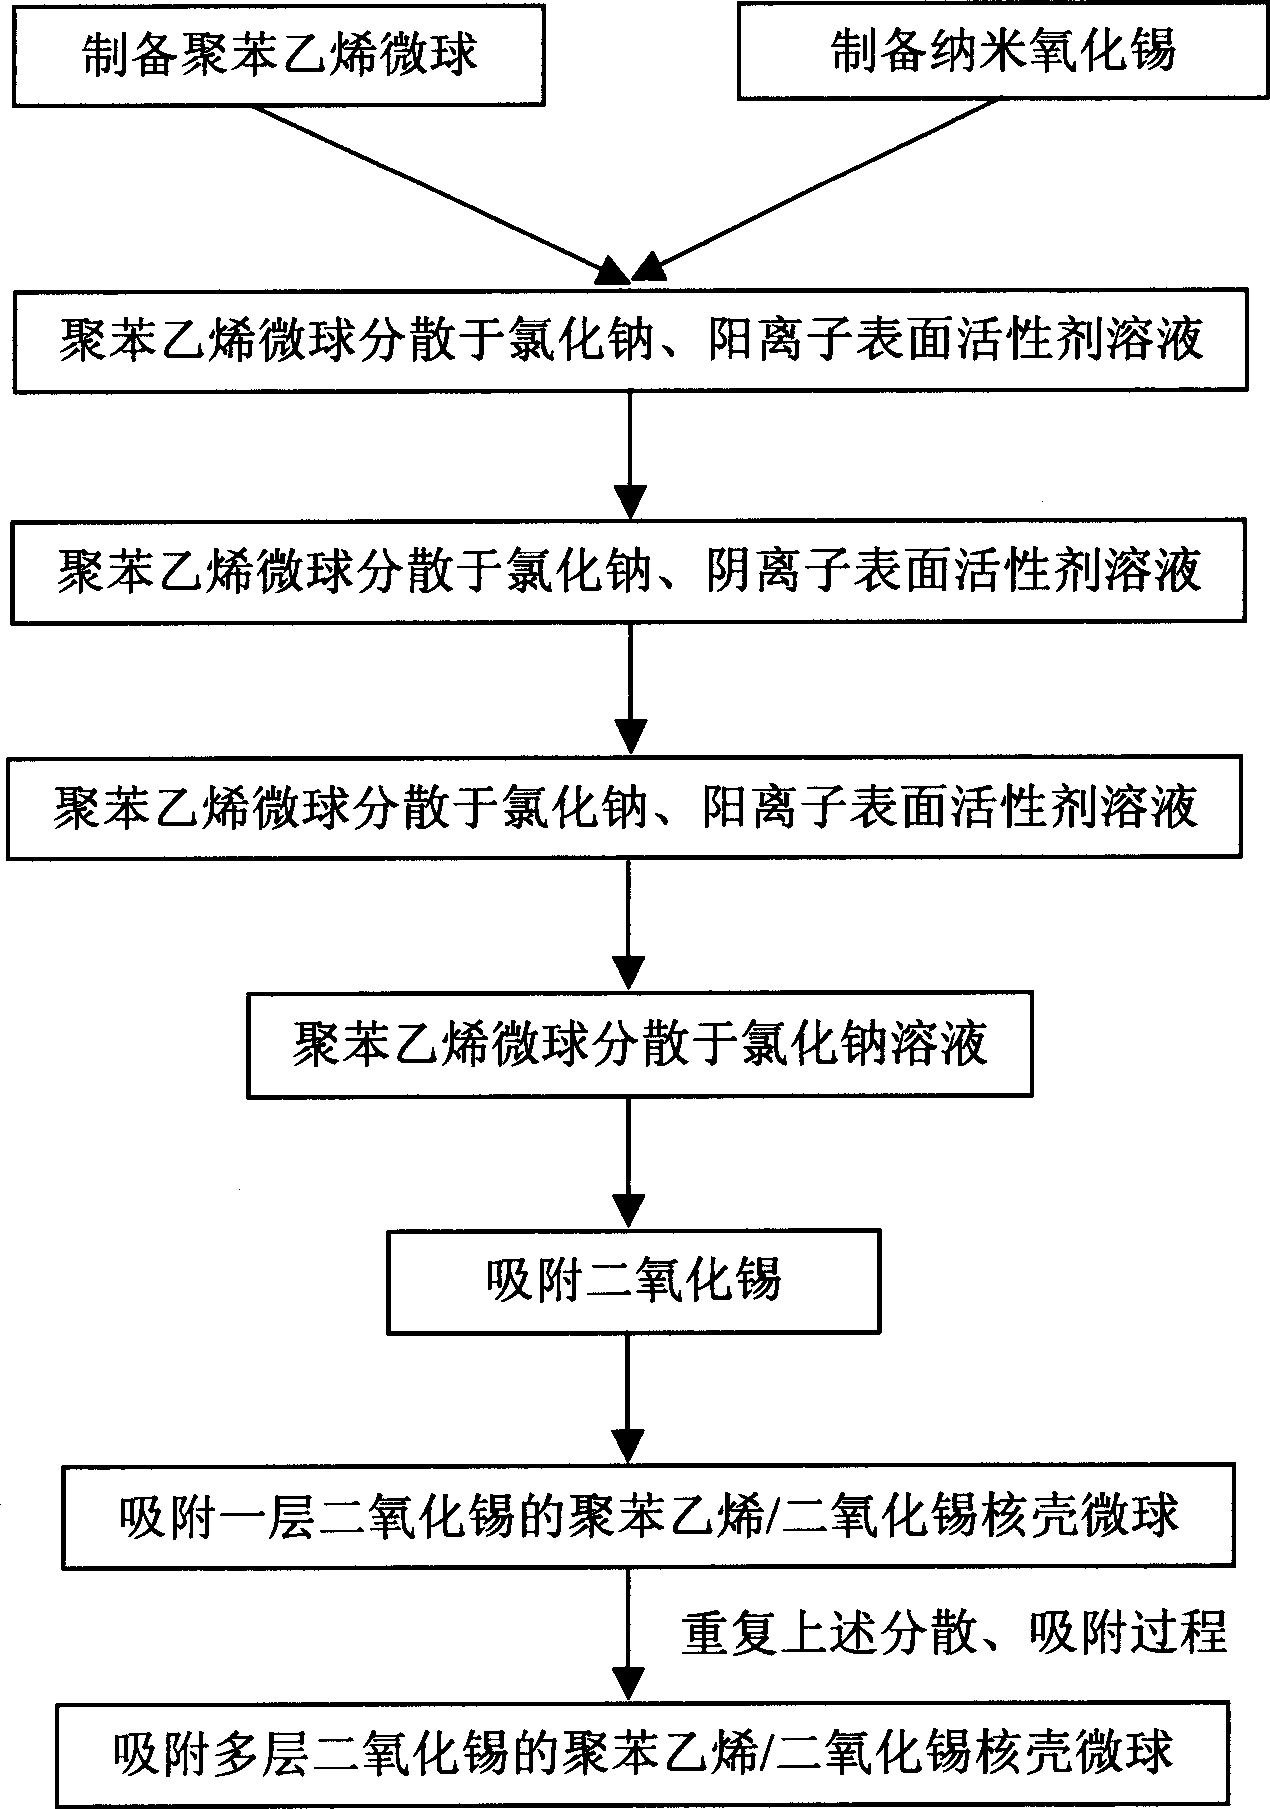 Process for preparing polyphenylethylene/tin dioxide nucleic shell microball